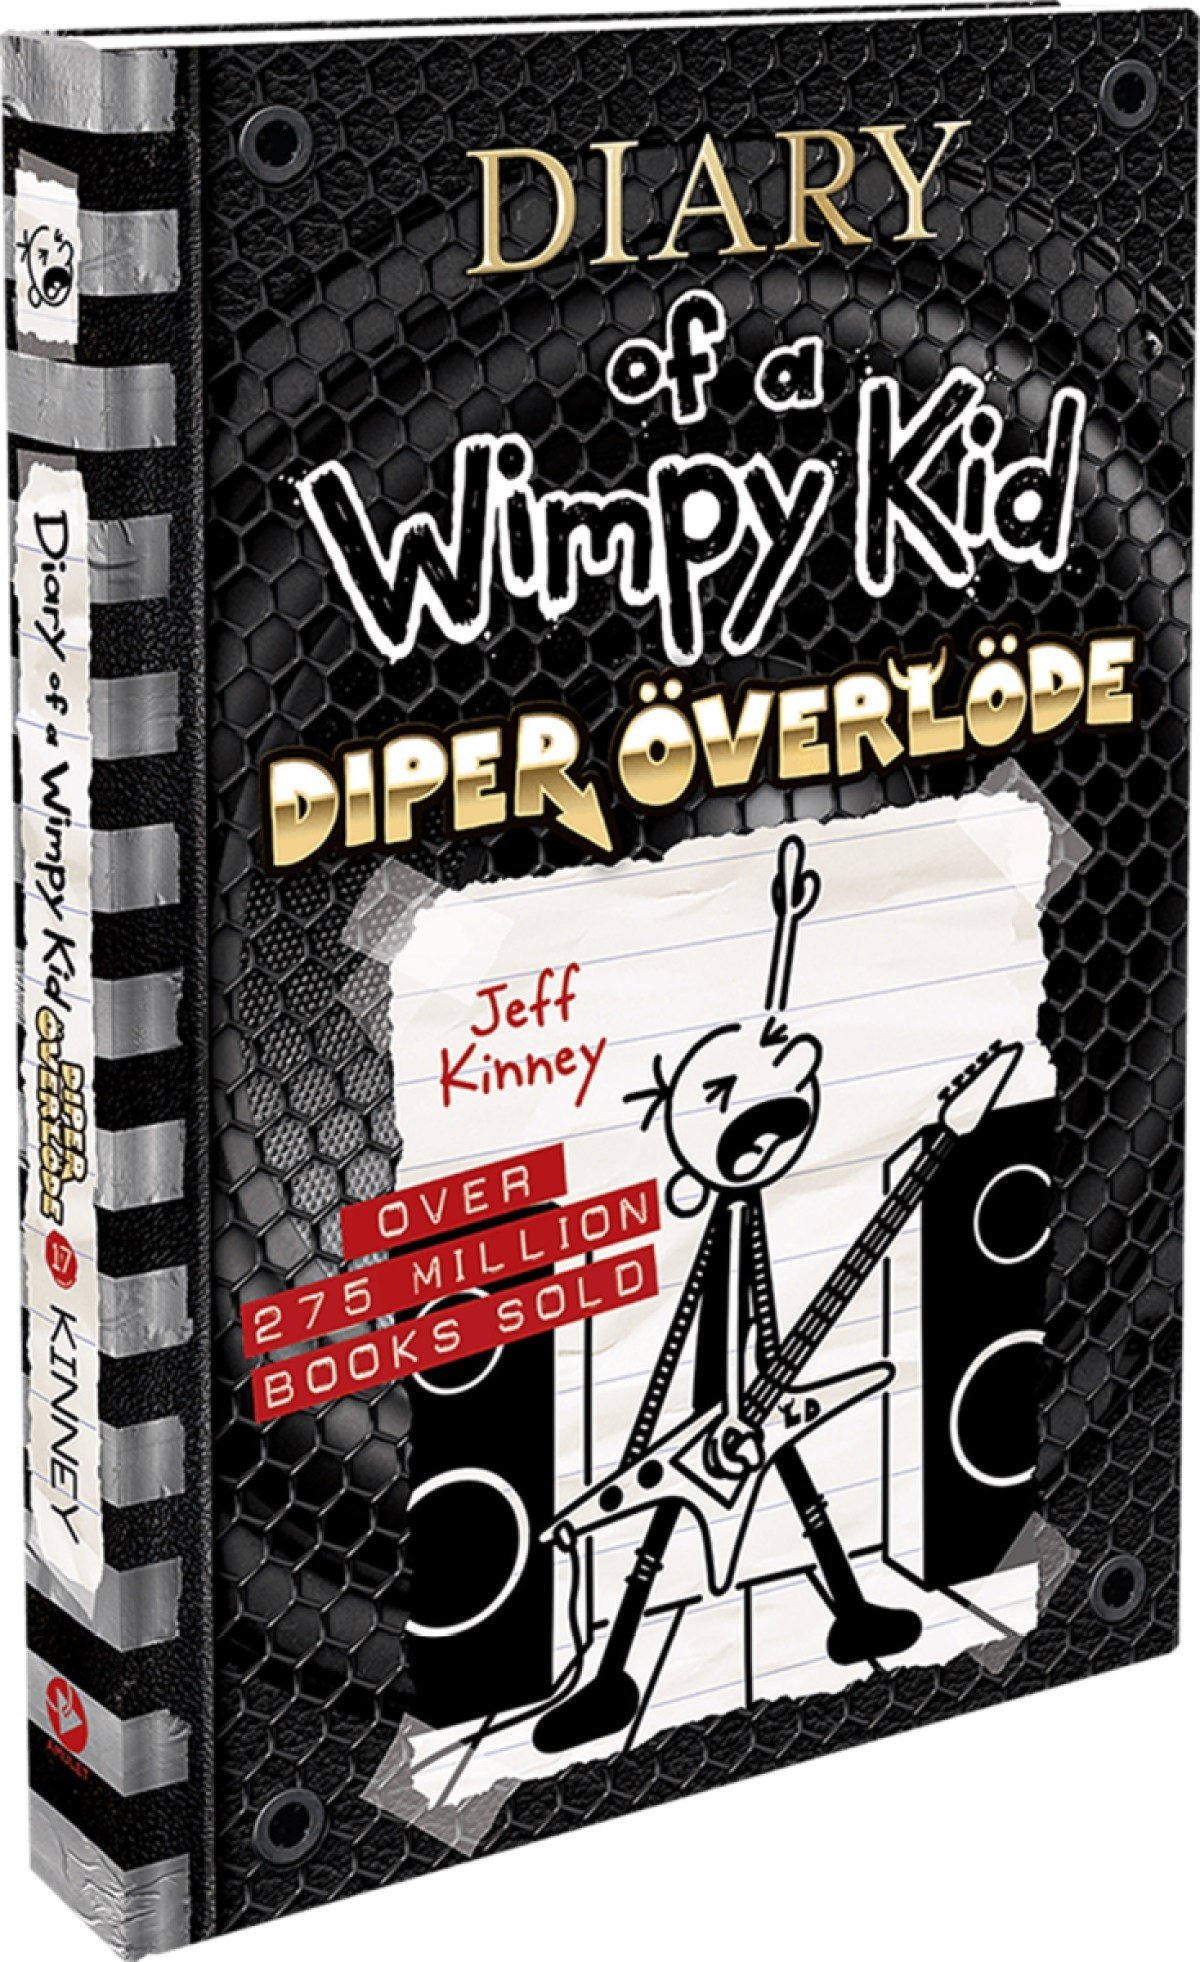 black book cover with cartoon kid playing guitar. Diary of a Wimpy Kid Diper Overlode